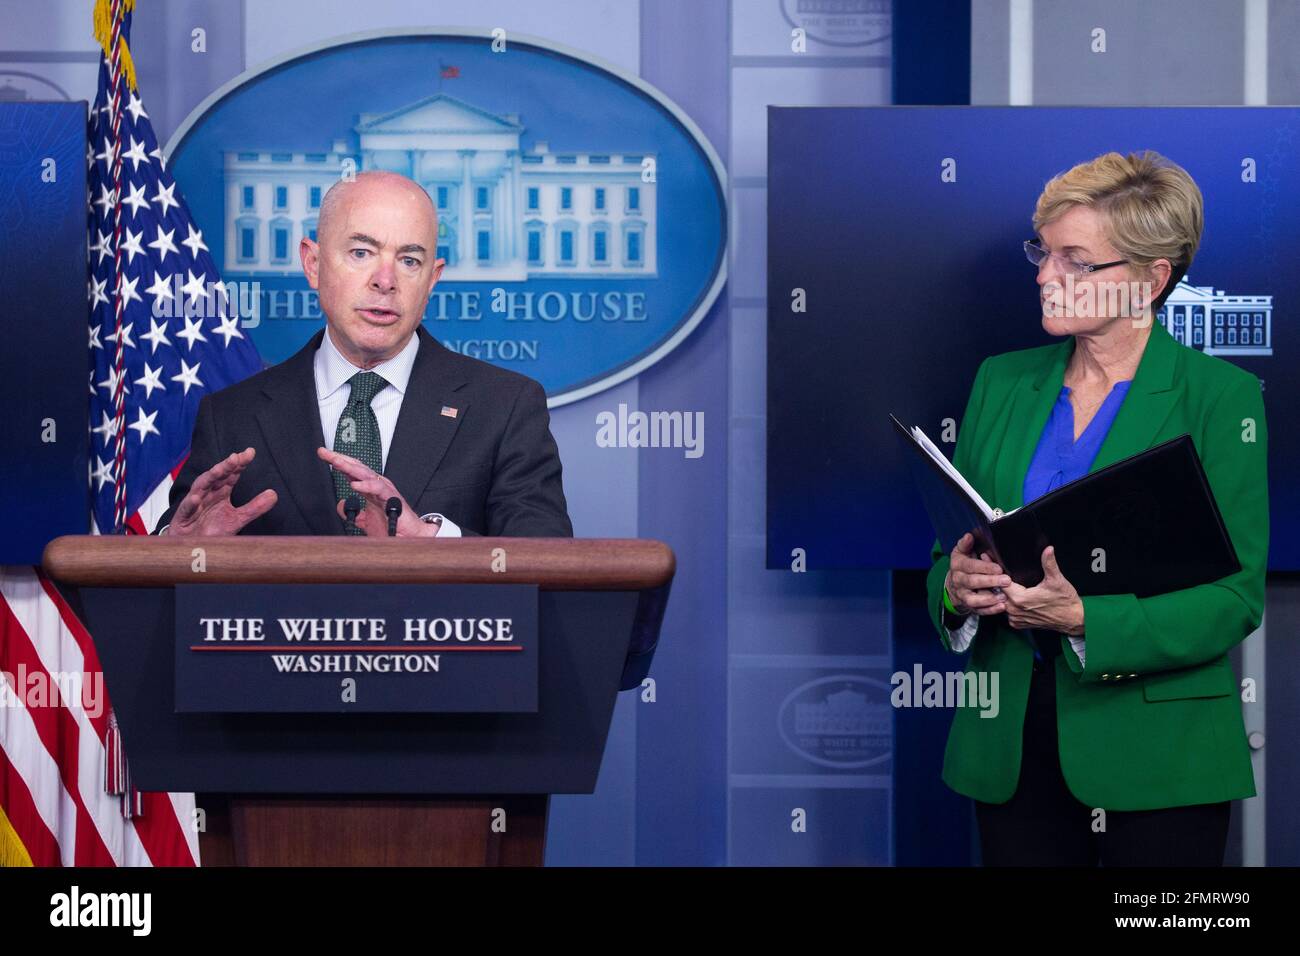 US Secretary of Homeland Security Alejandro Mayorkas (L) and US Secretary of Energy Jennifer Granholm (R) participate in a news conference during which the shutdown of the Colonial Pipeline was discussed, in the James Brady Press Briefing Room of the White House, in Washington, DC, USA, 11 May 2021. A demand for gasoline in Southeastern states has spiked following the shutdown of Colonial Pipeline due to a cyberattack.Credit: Michael Reynolds/Pool via CNP /MediaPunch Stock Photo